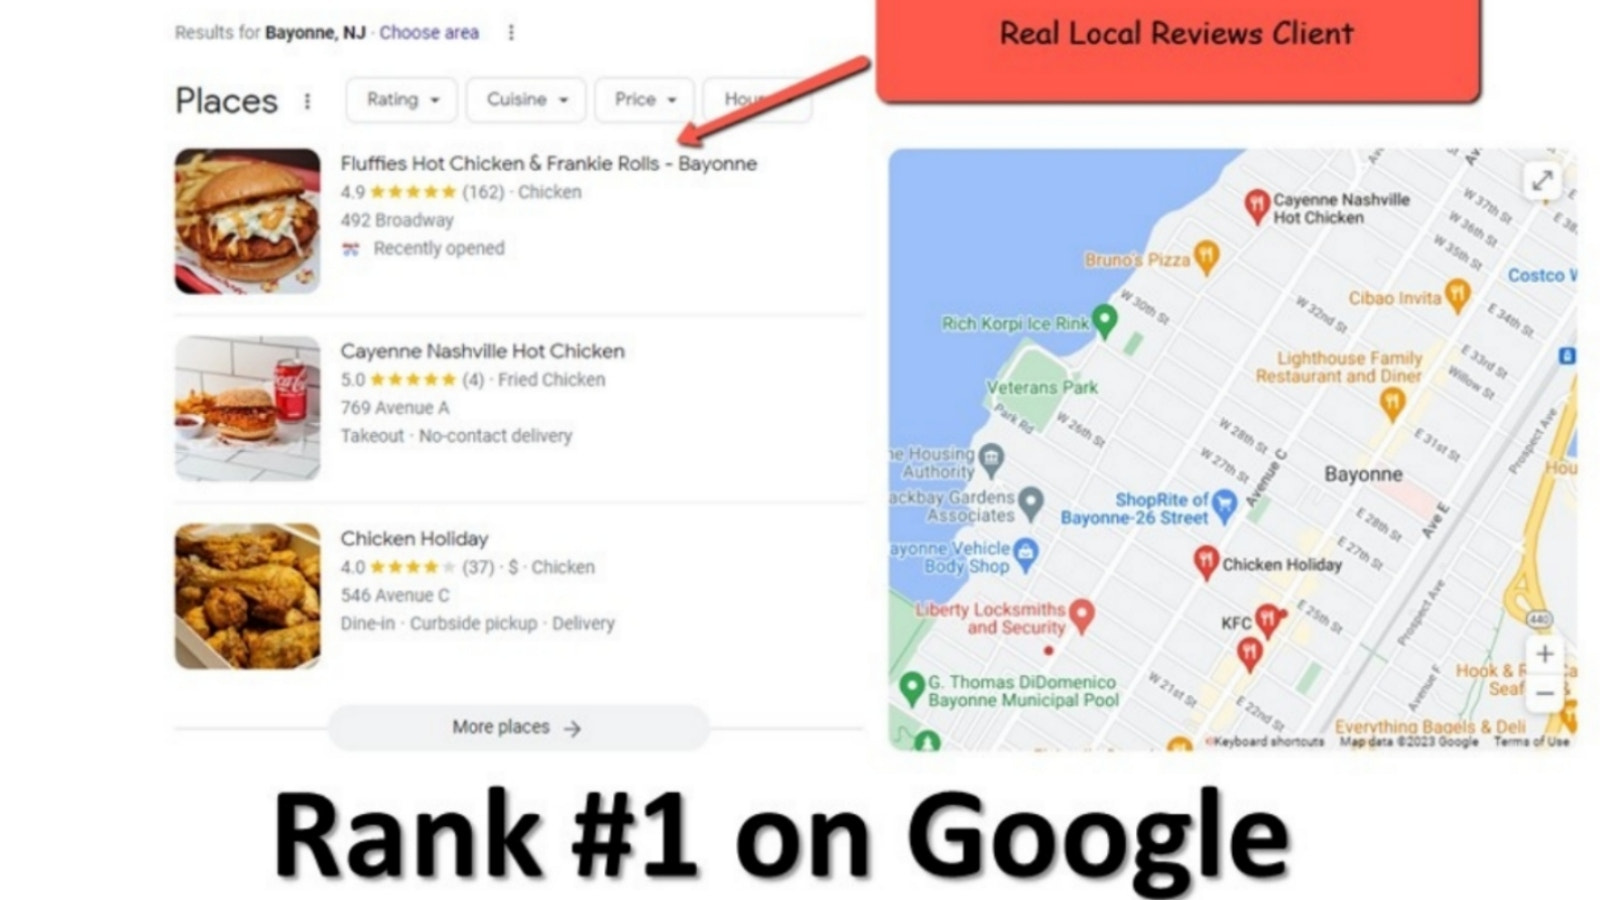 Real Results from LocalReviews Client